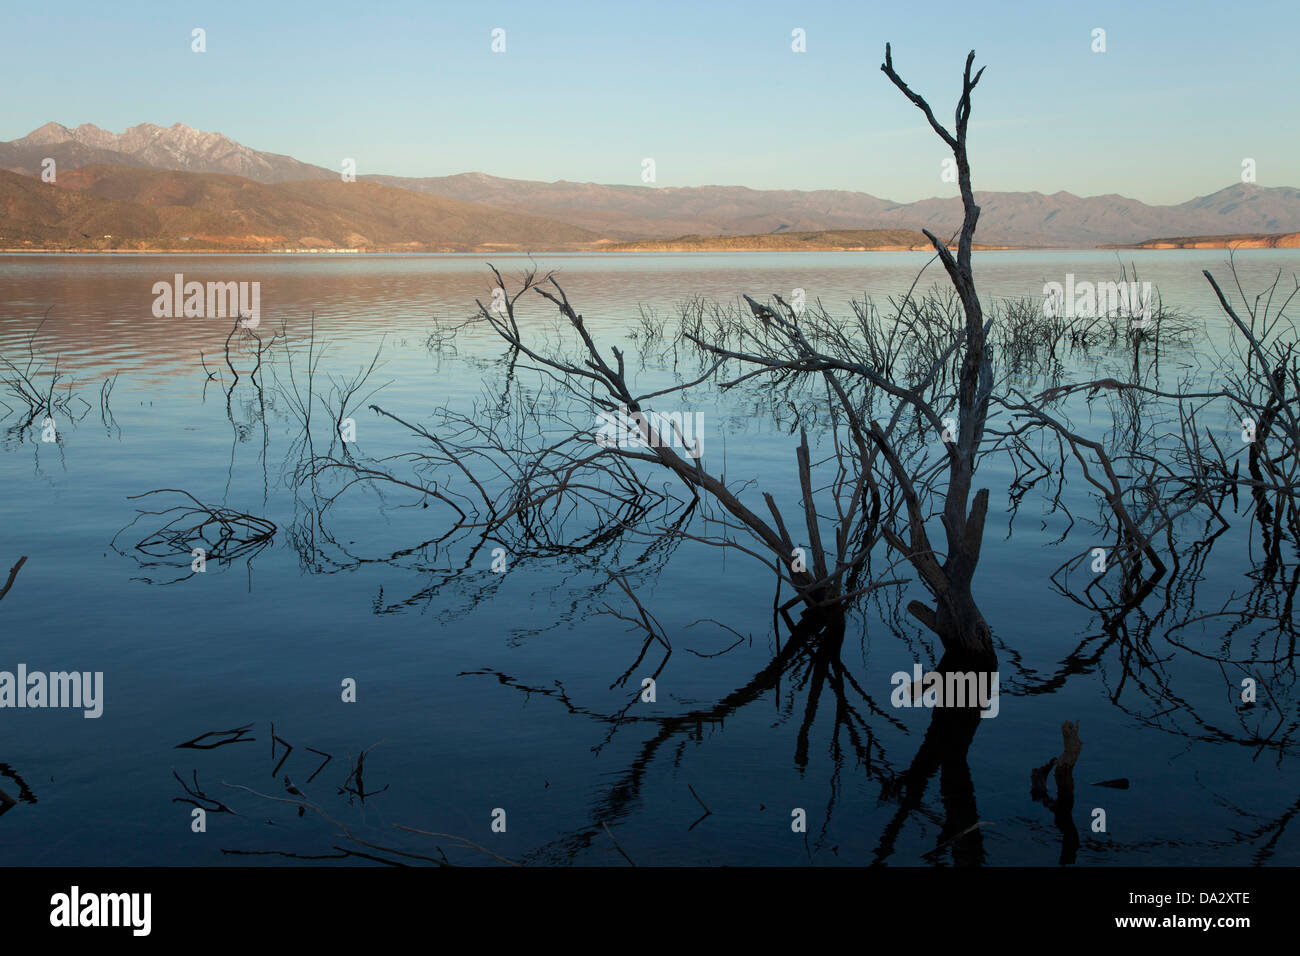 Dead brush in low water in Roosevelt Lake in central Arizona. Stock Photo